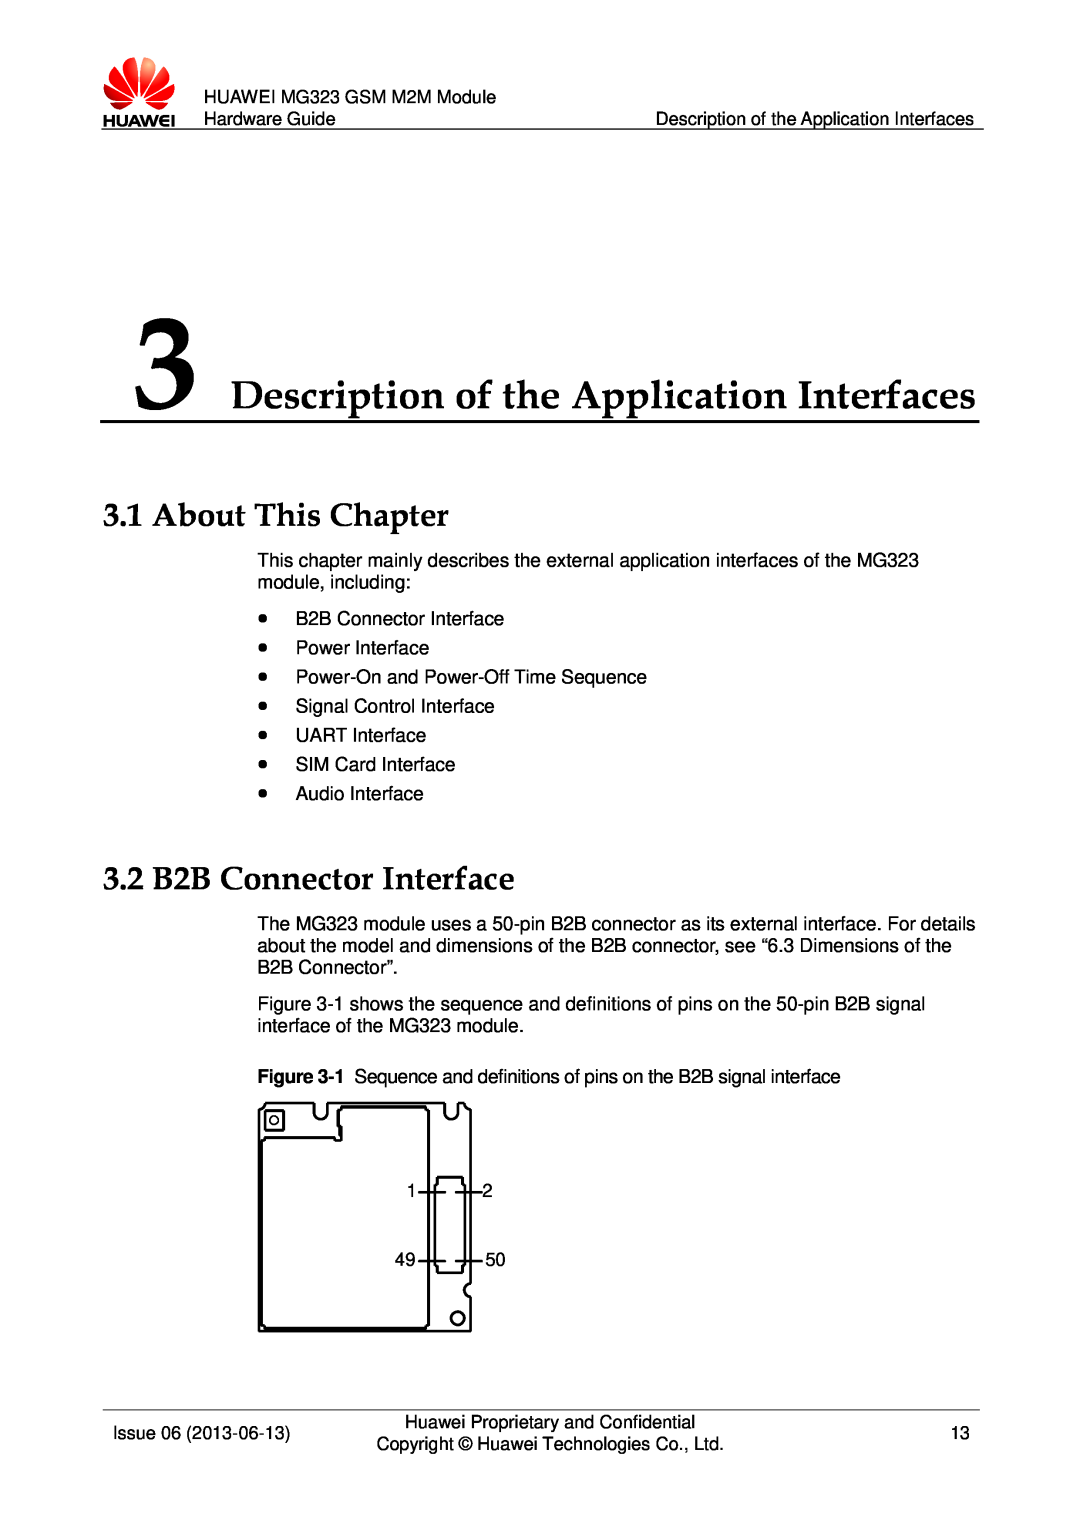 Huawei MG323 manual Description of the Application Interfaces, About This Chapter, 3.2 B2B Connector Interface 